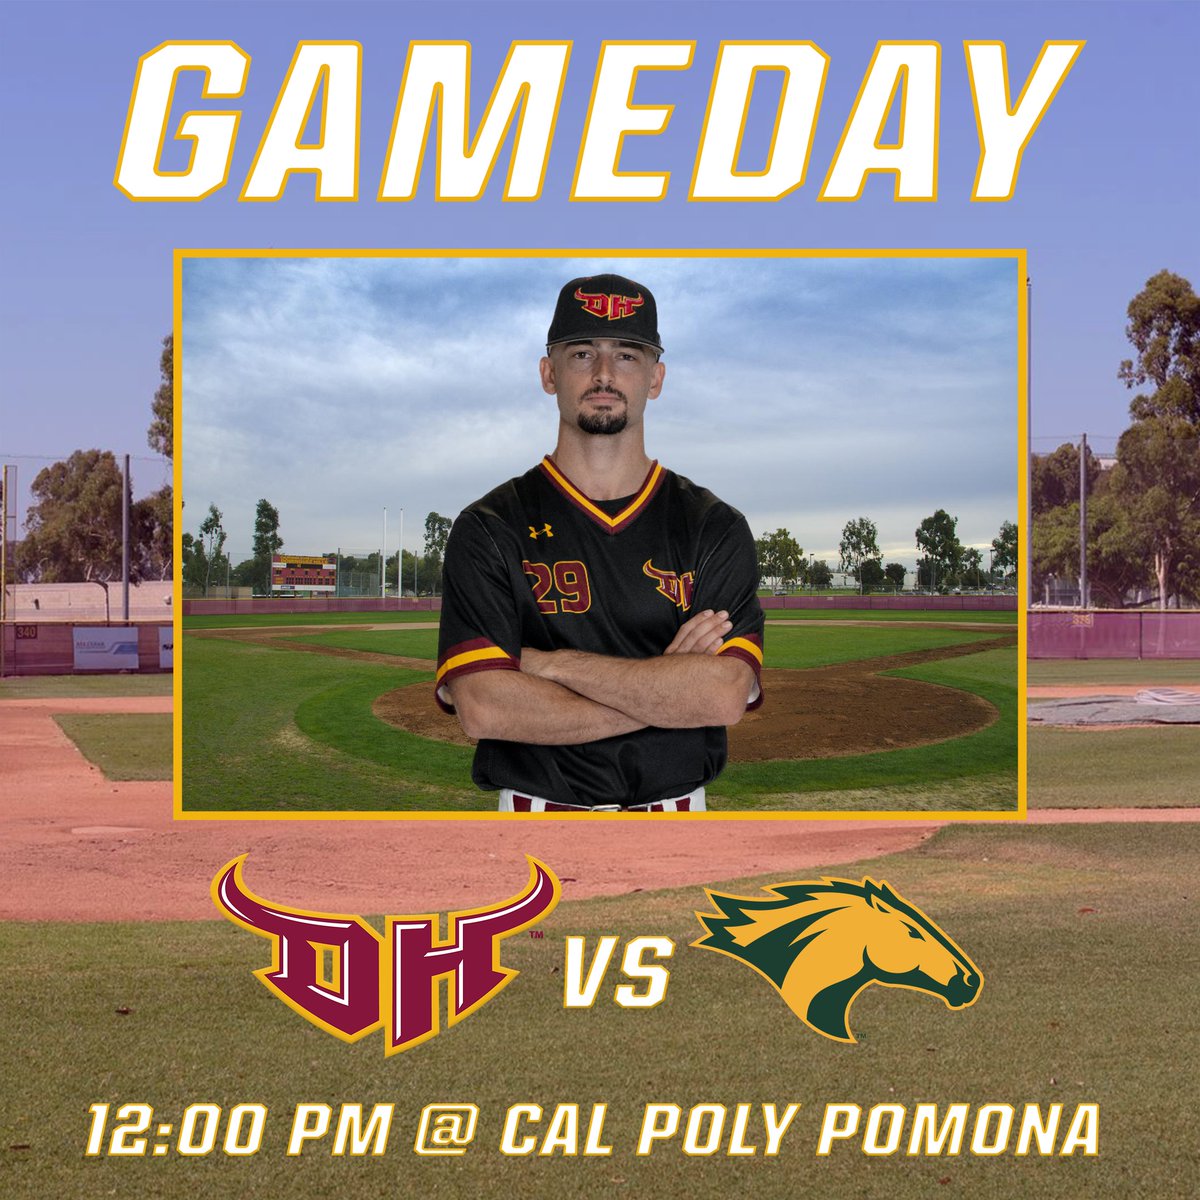 Gameday! @CSUDHbaseball closes their series today against Cal Poly Pomona. ⏰: 12 pm 📍: Pomona, CA 📺: ccaanetwork.com 📊: bit.ly/3wcf06X